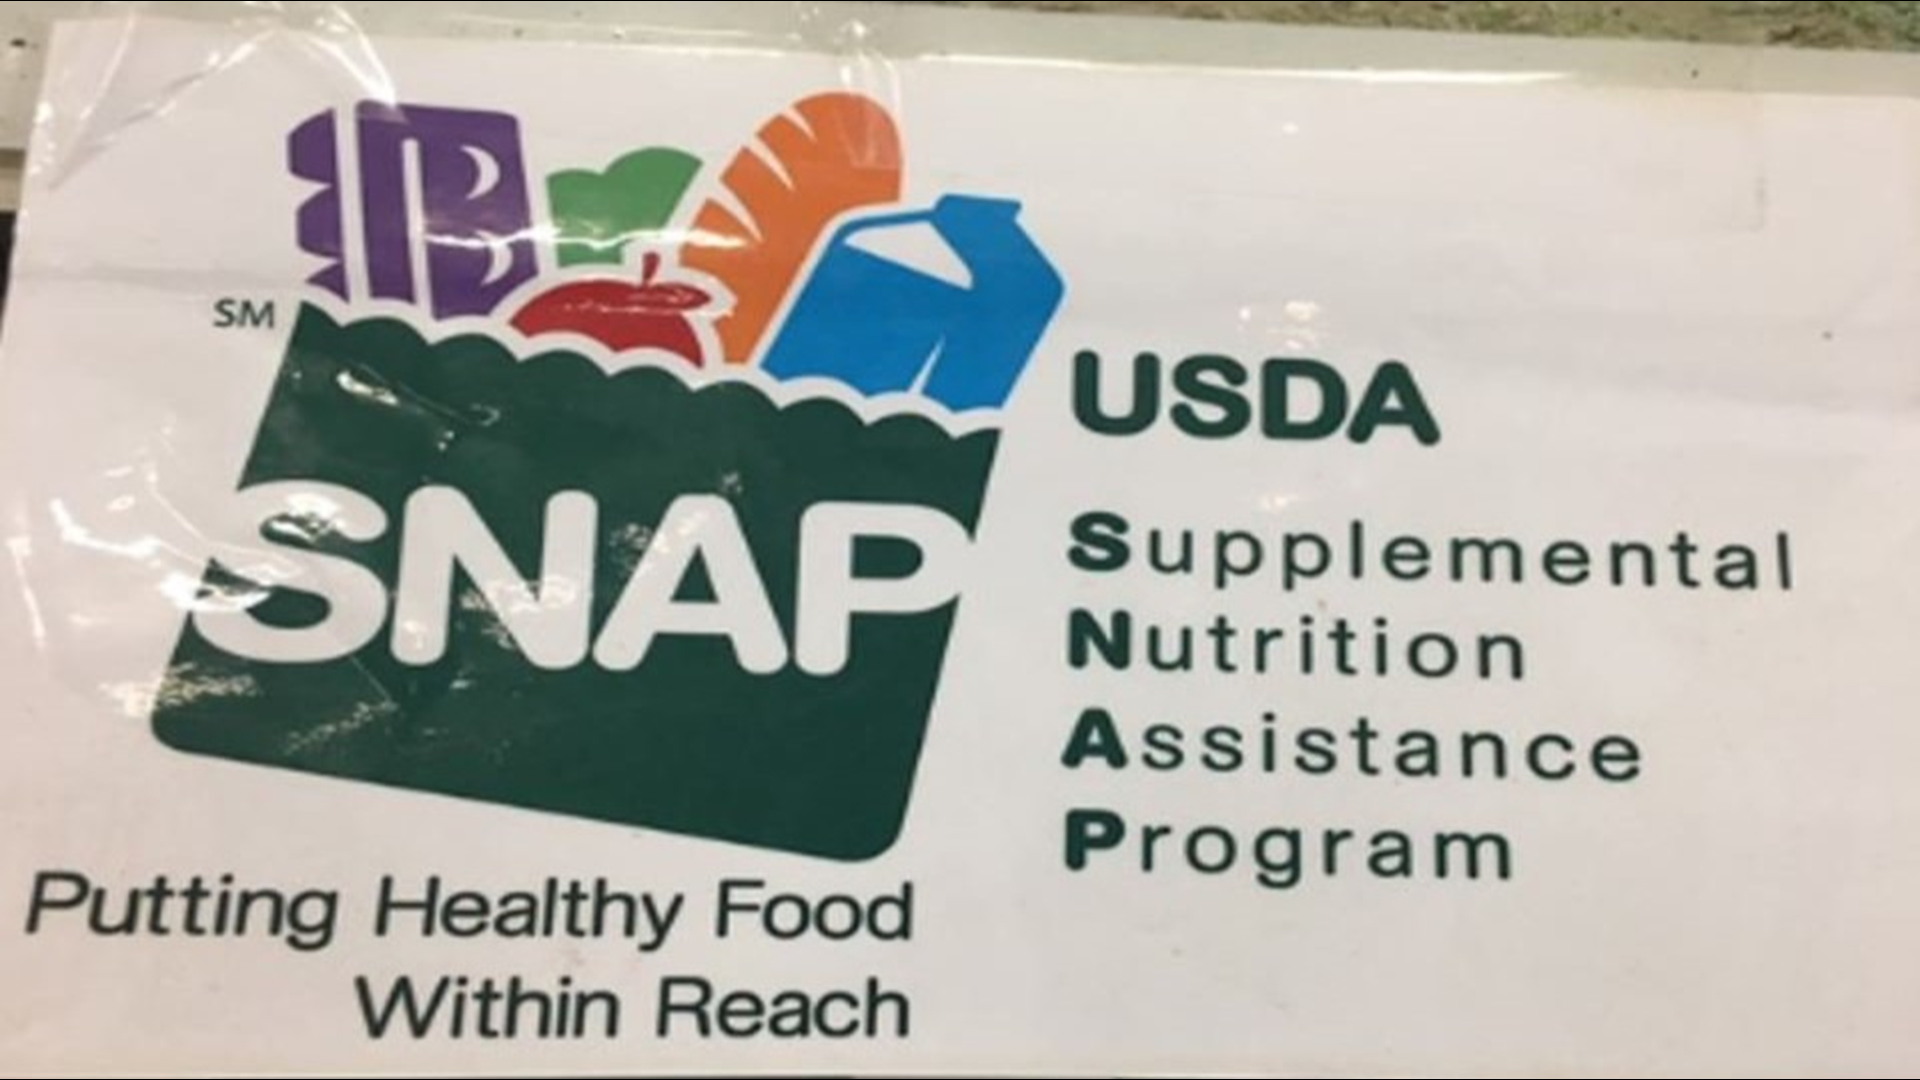 About 3.1 million people would lose food stamp benefits under the Trump administration's proposal to tighten automatic eligibility requirements for the food stamp program.